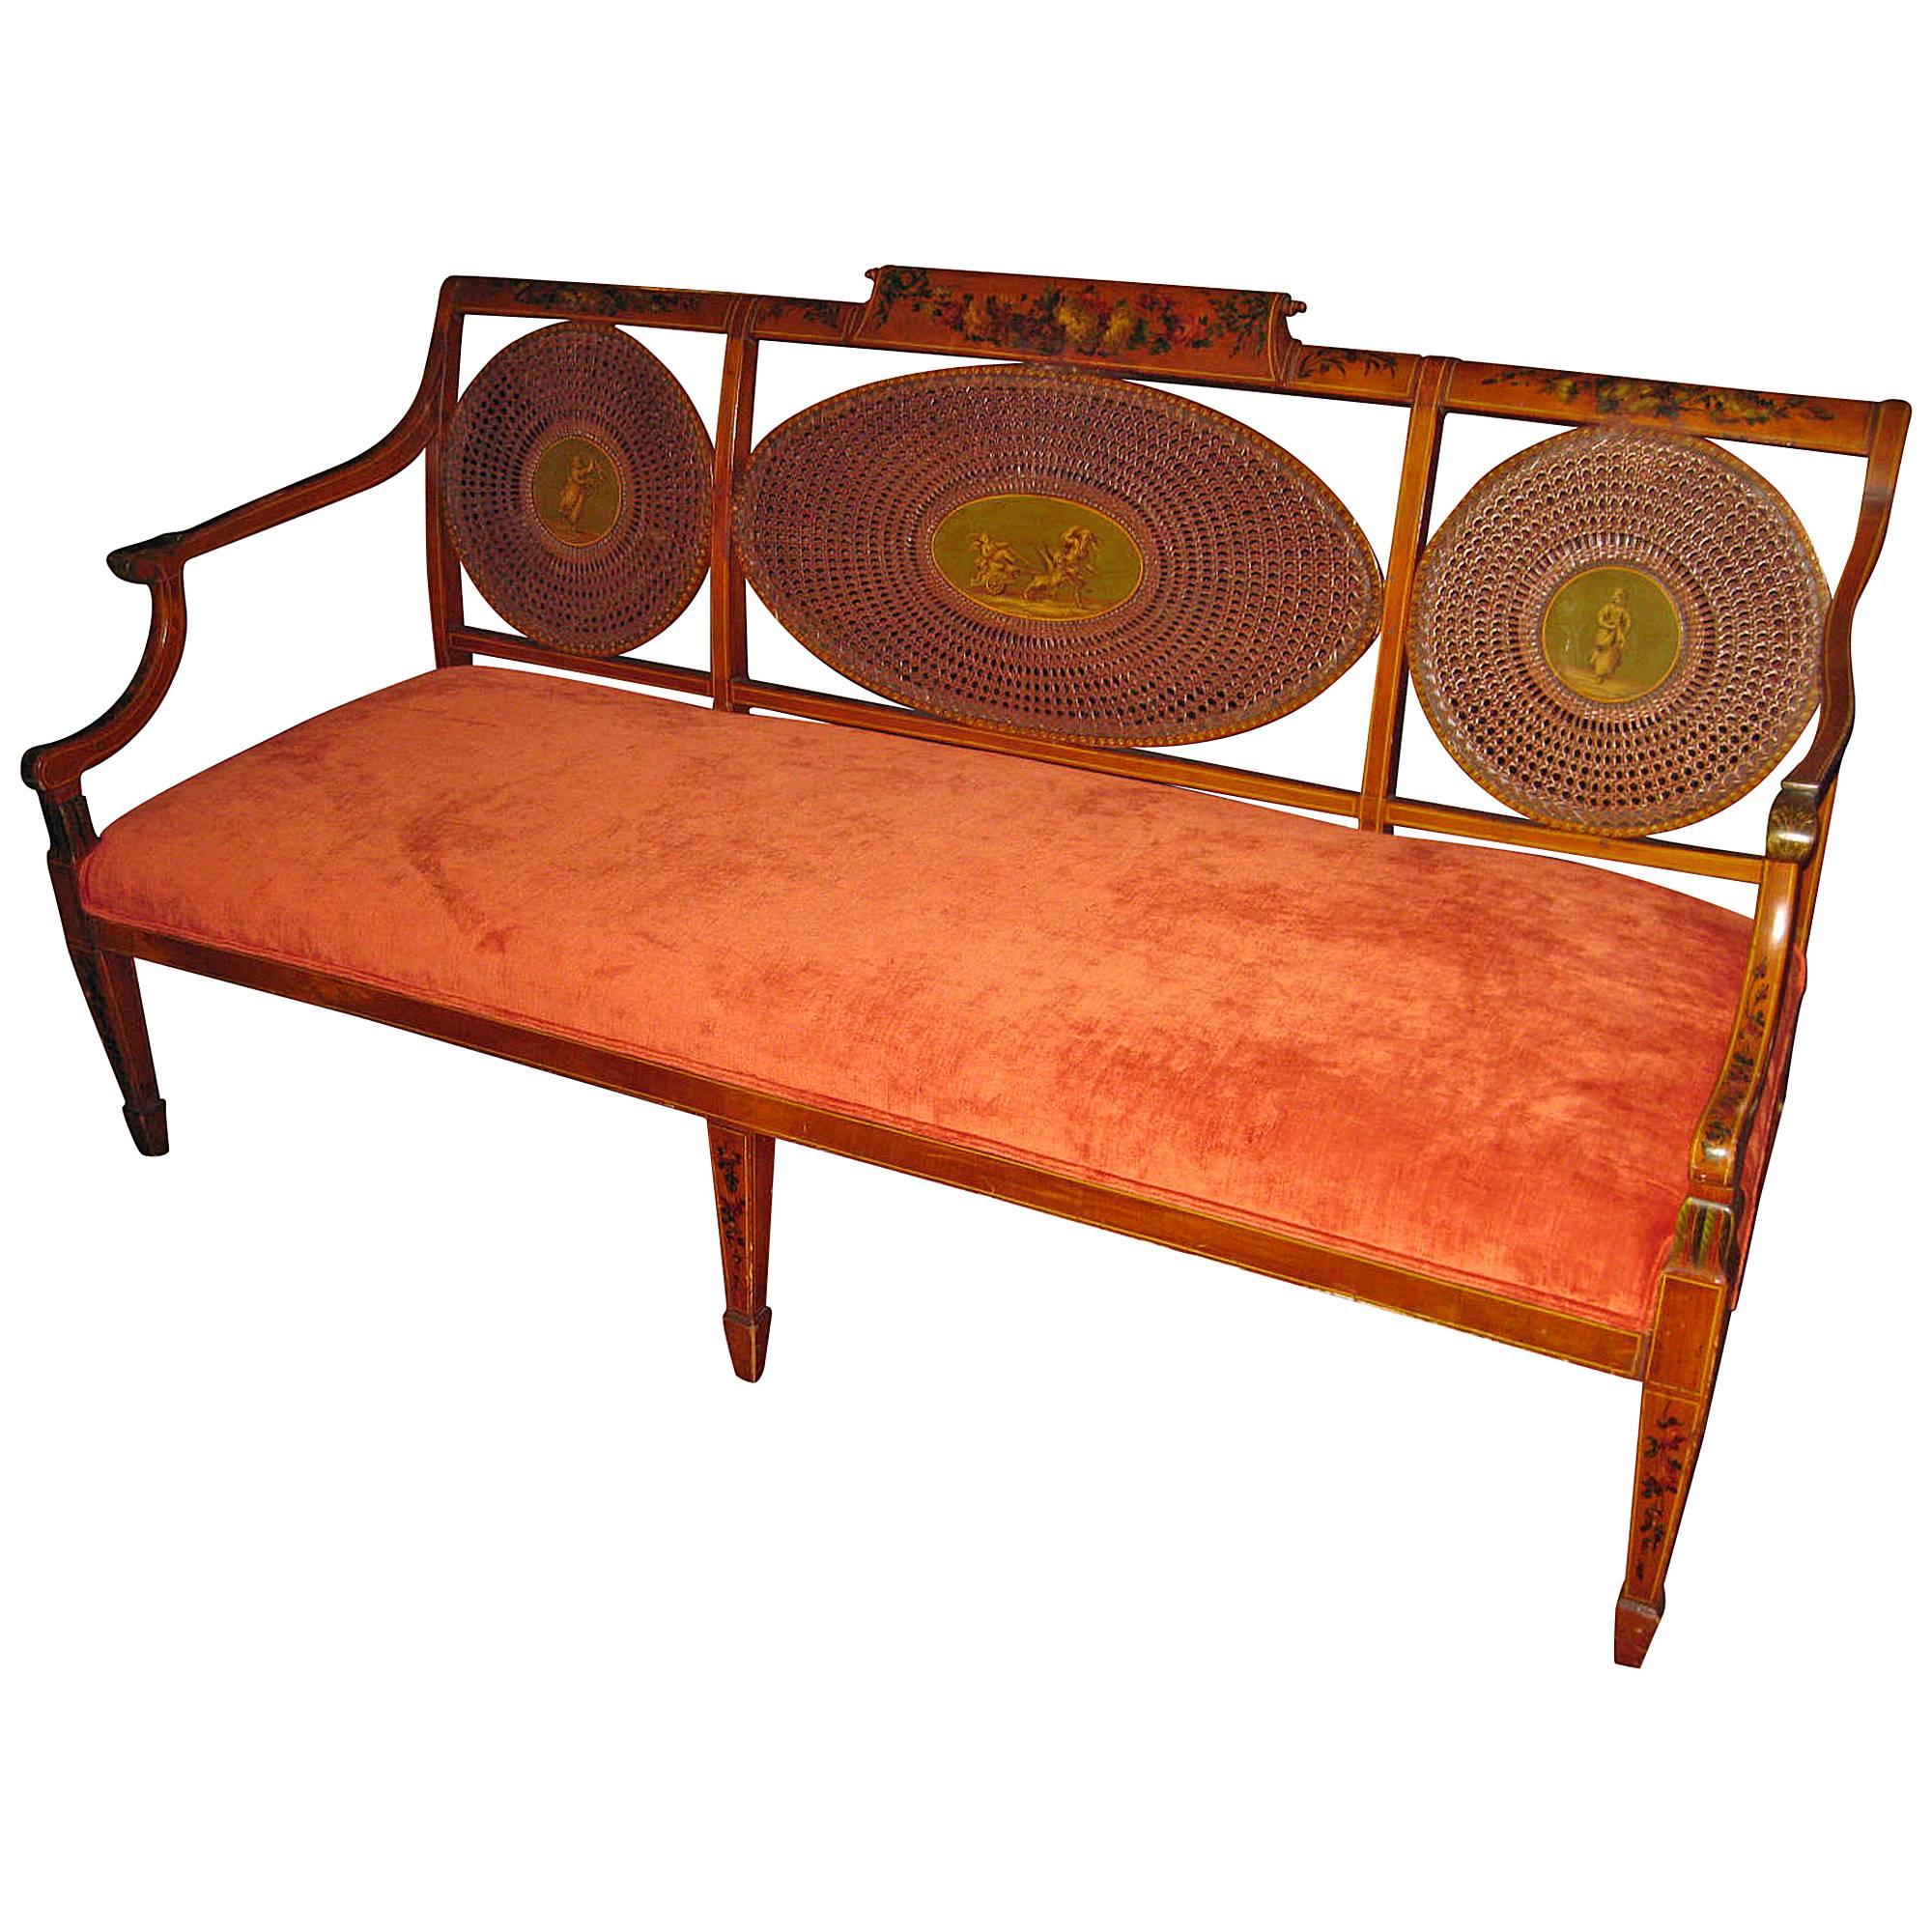 Adam Style Painted Satinwood Triple Chair Caned Back Bench Settee